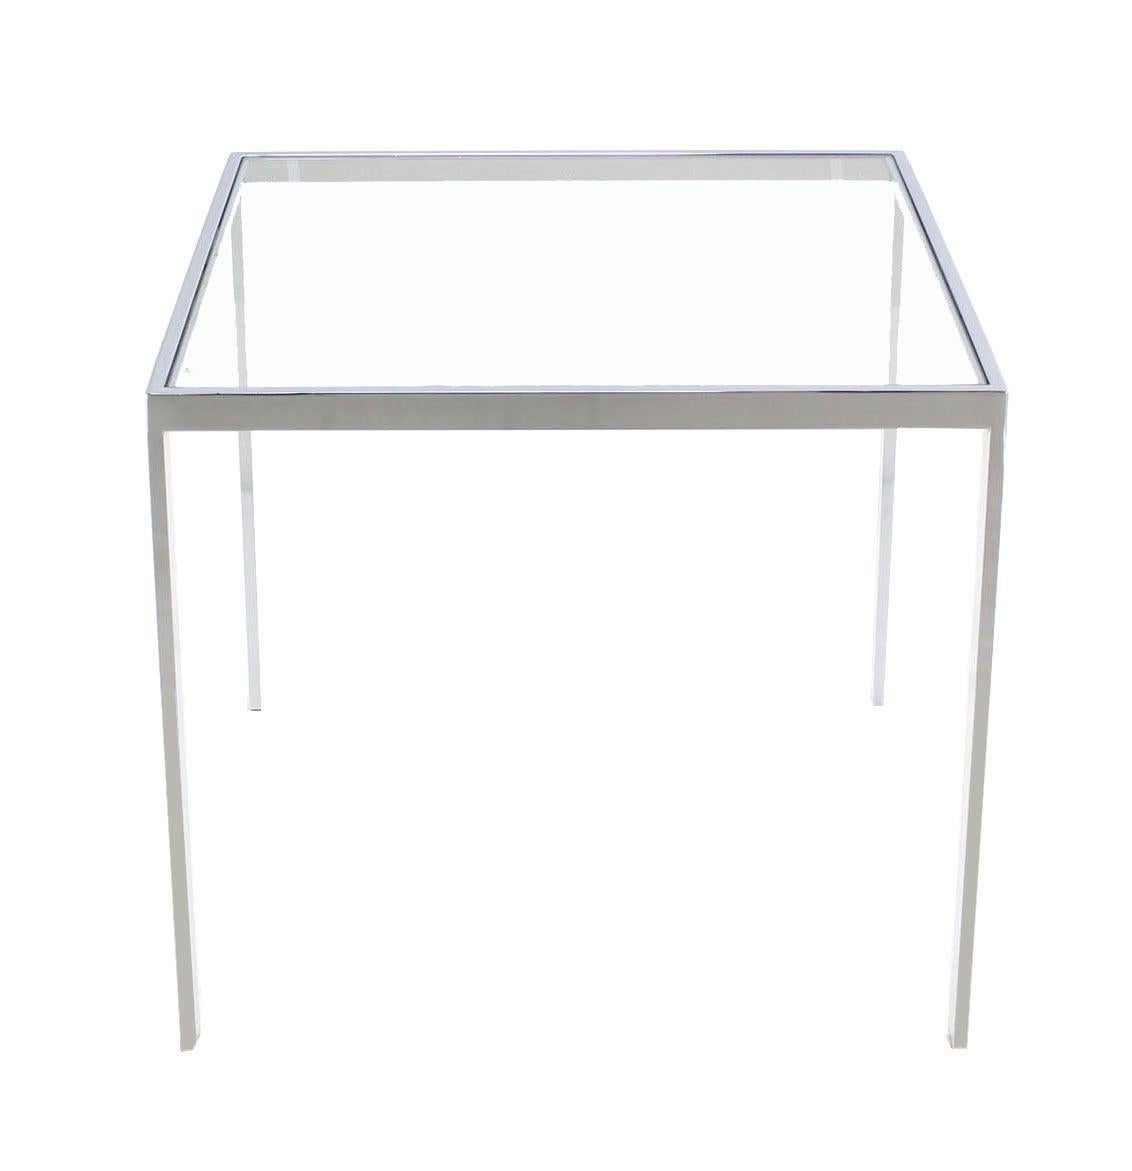 Square Cube Chrome Glass Top Game Small Dinning Dinette Table Bauhaus MINT For Sale 2